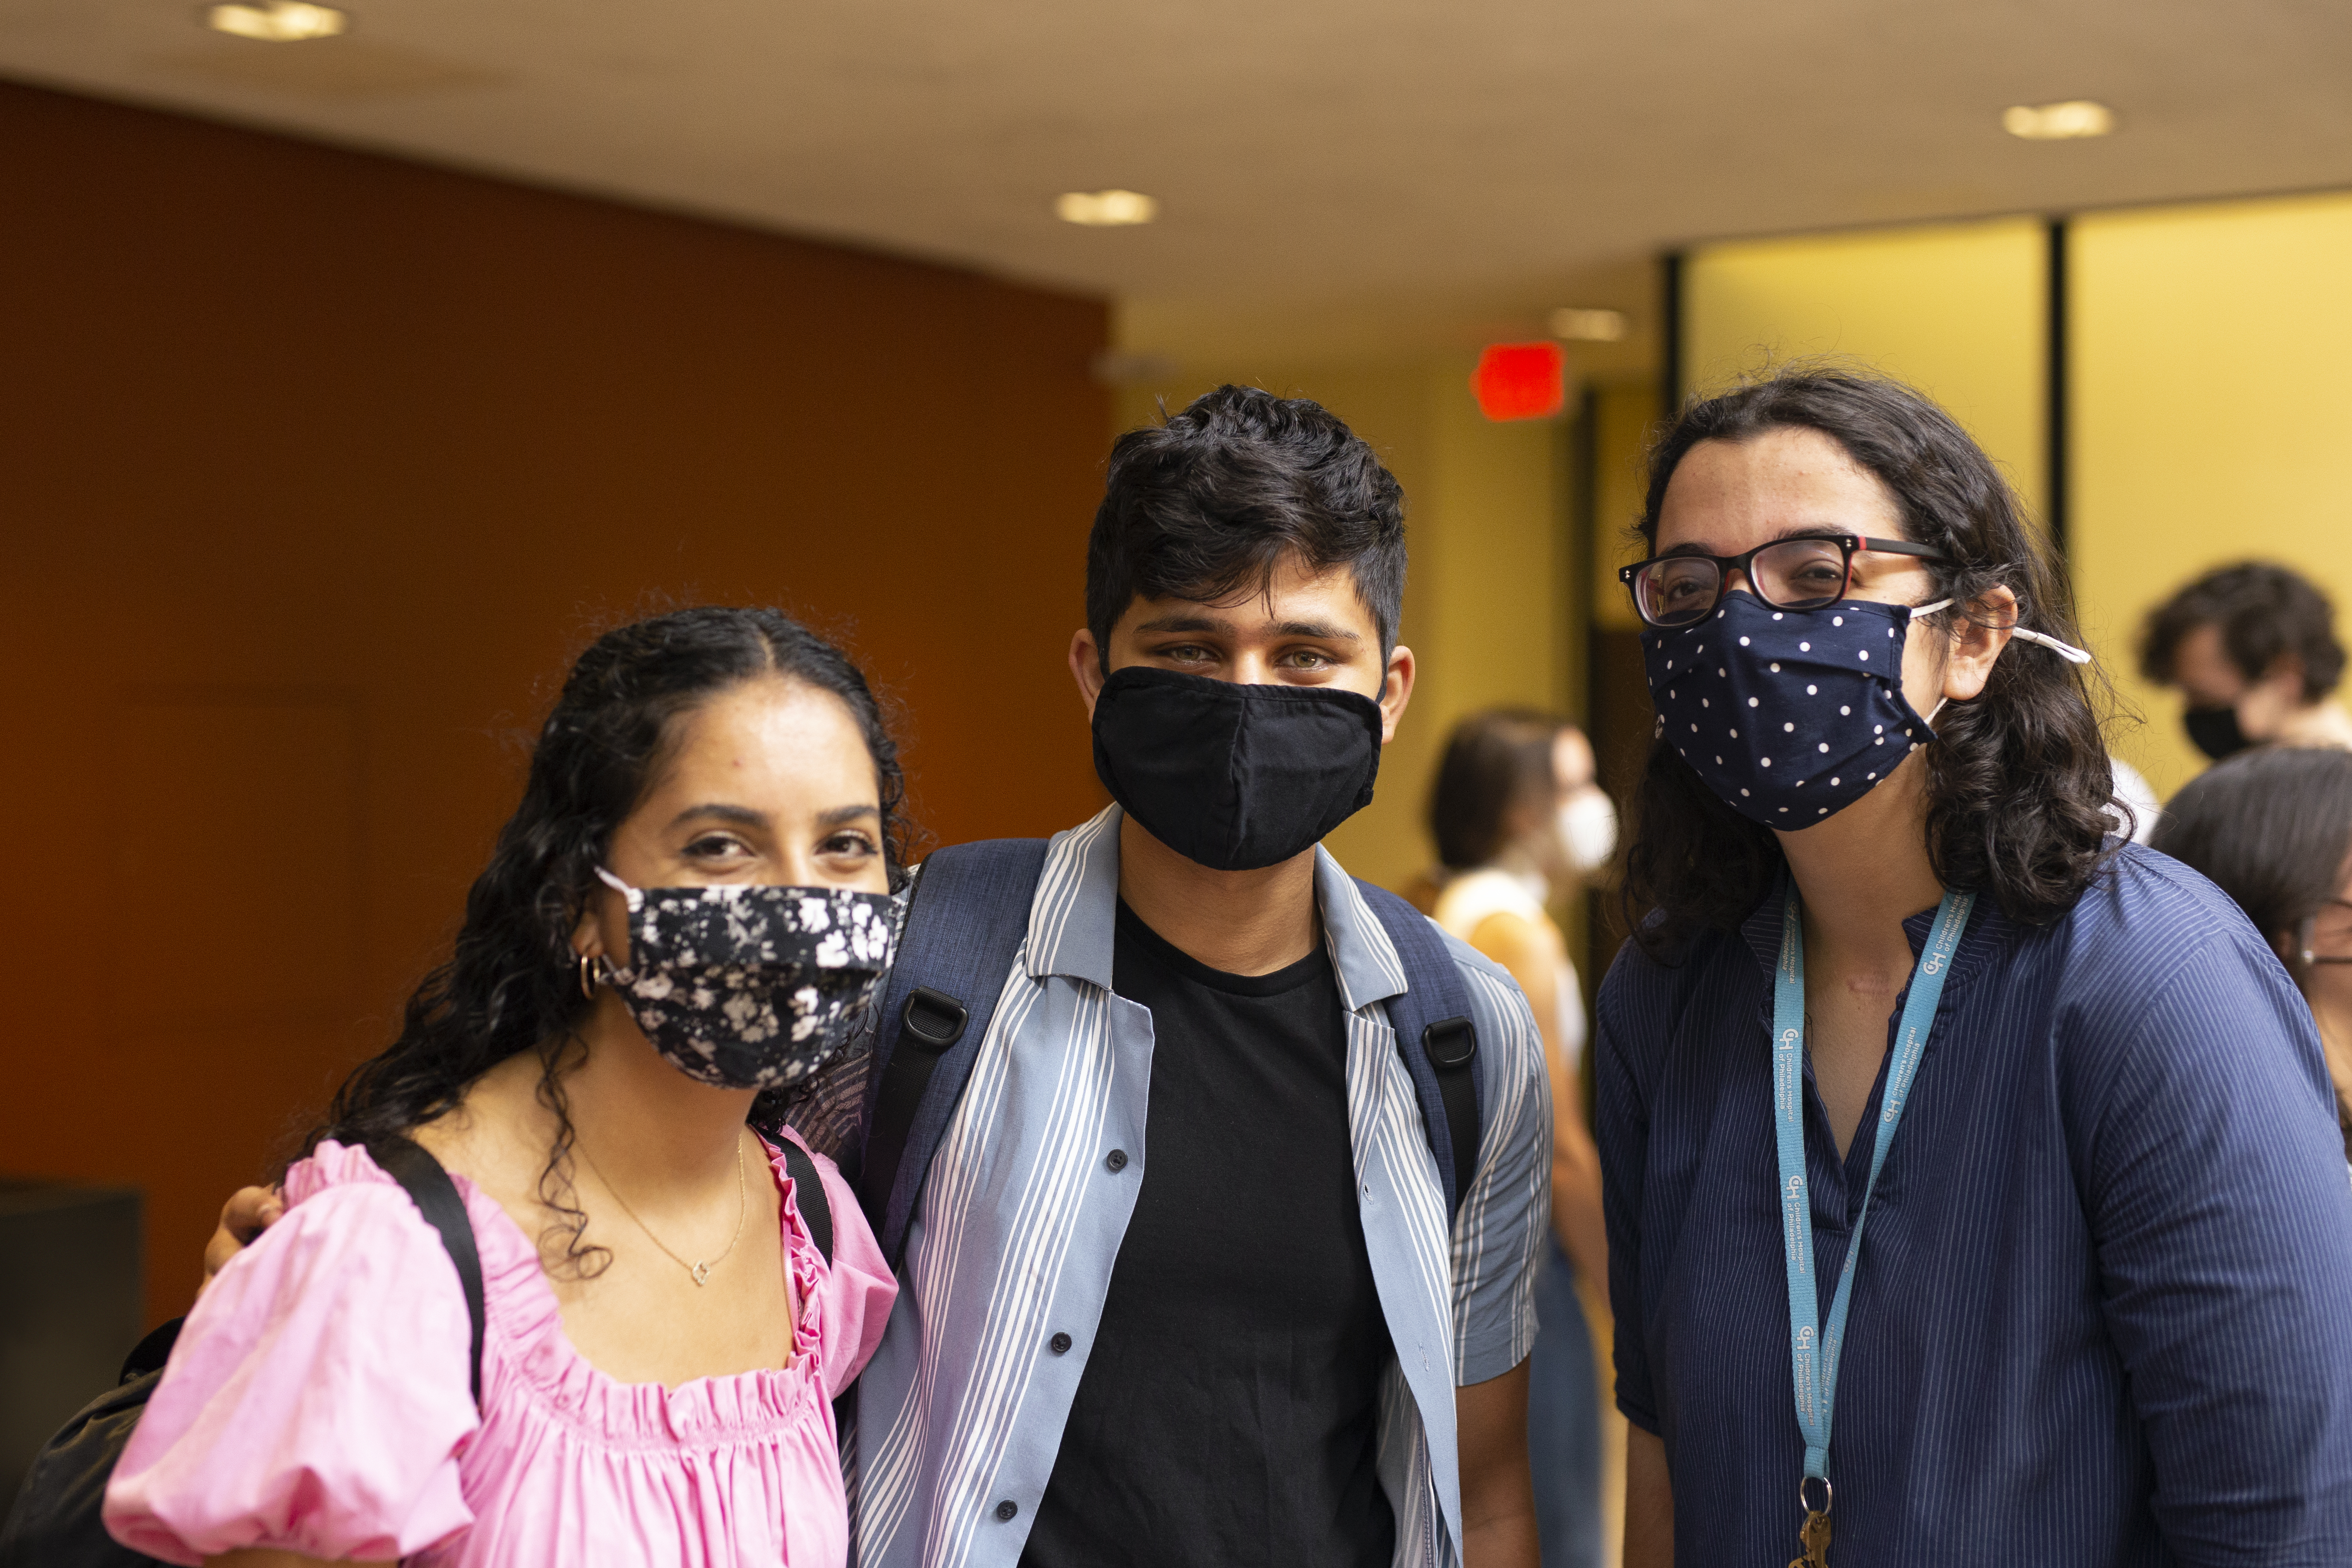 Three masked students pose together 